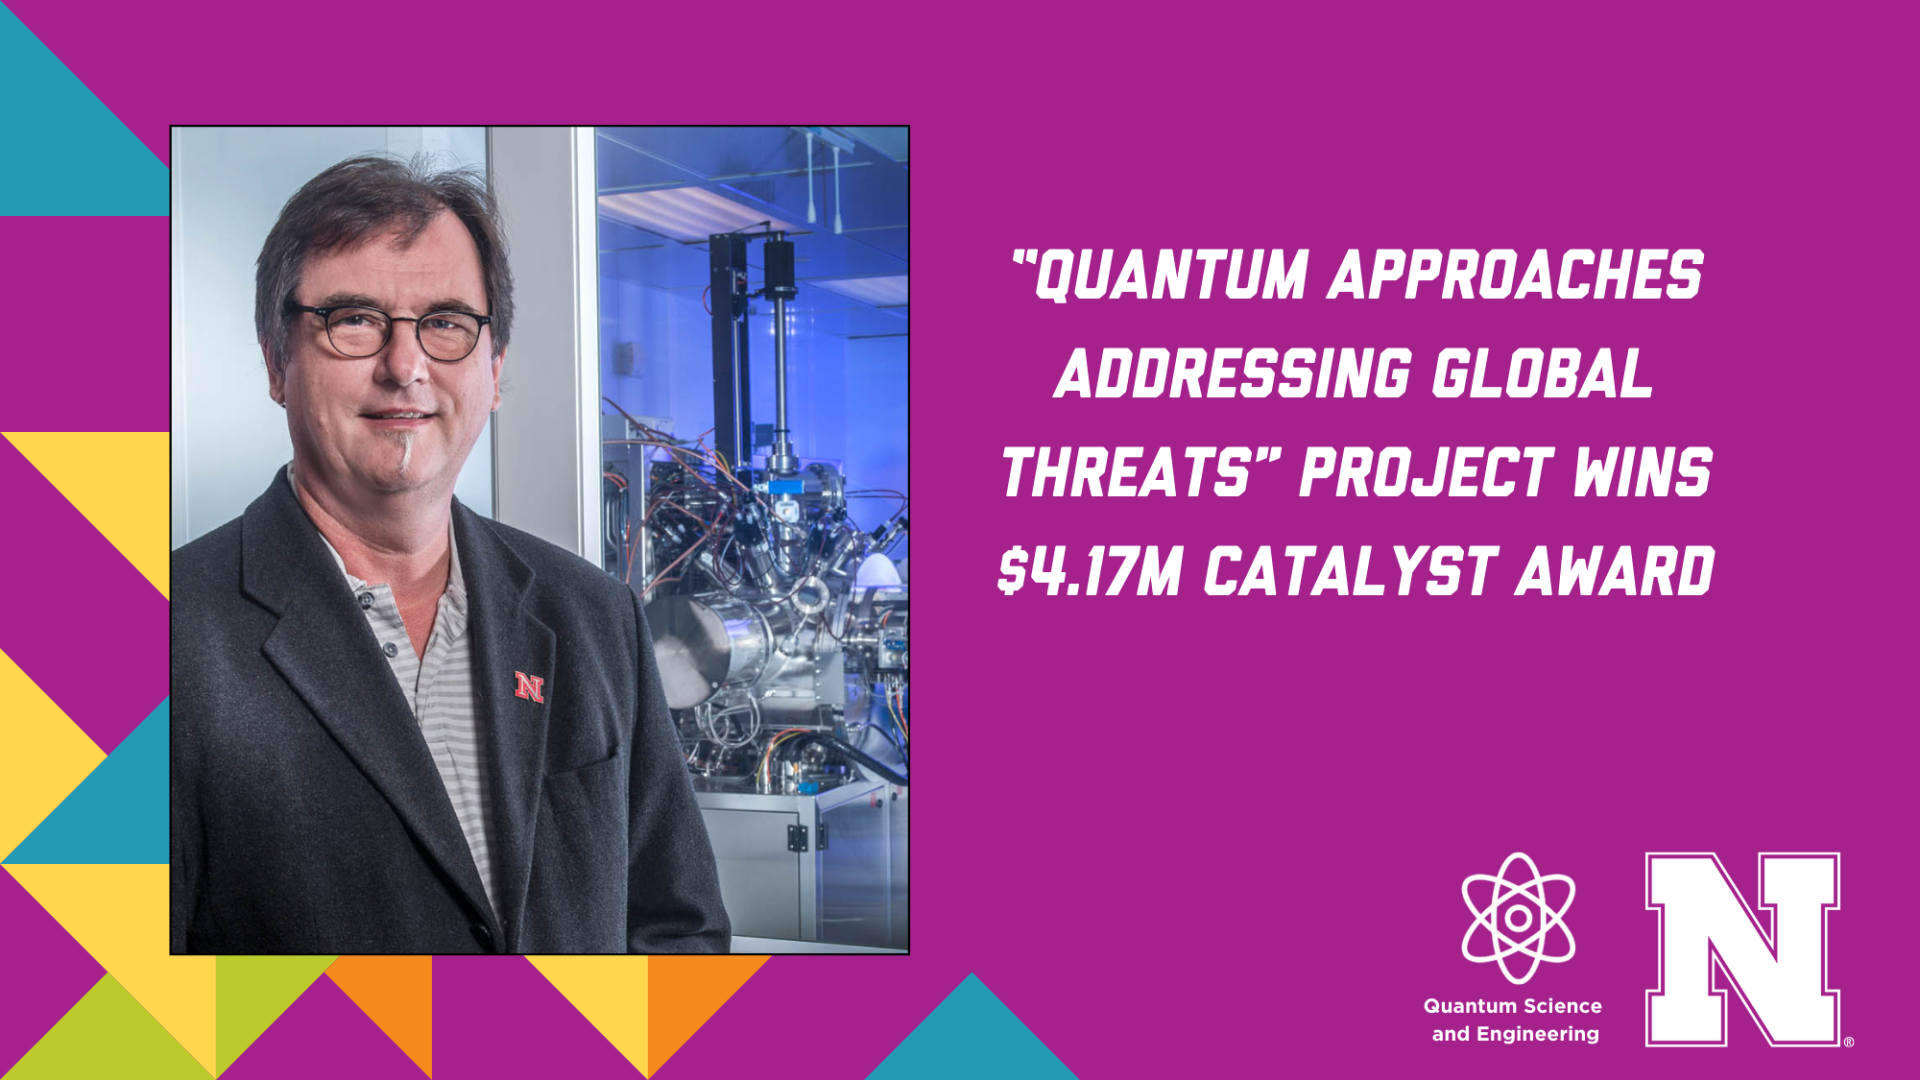 Photo of Christian Binek on left with the text 'Quantum Approaches Addressing Global Threats' project wins $4.17M Catalyst Award on the right.